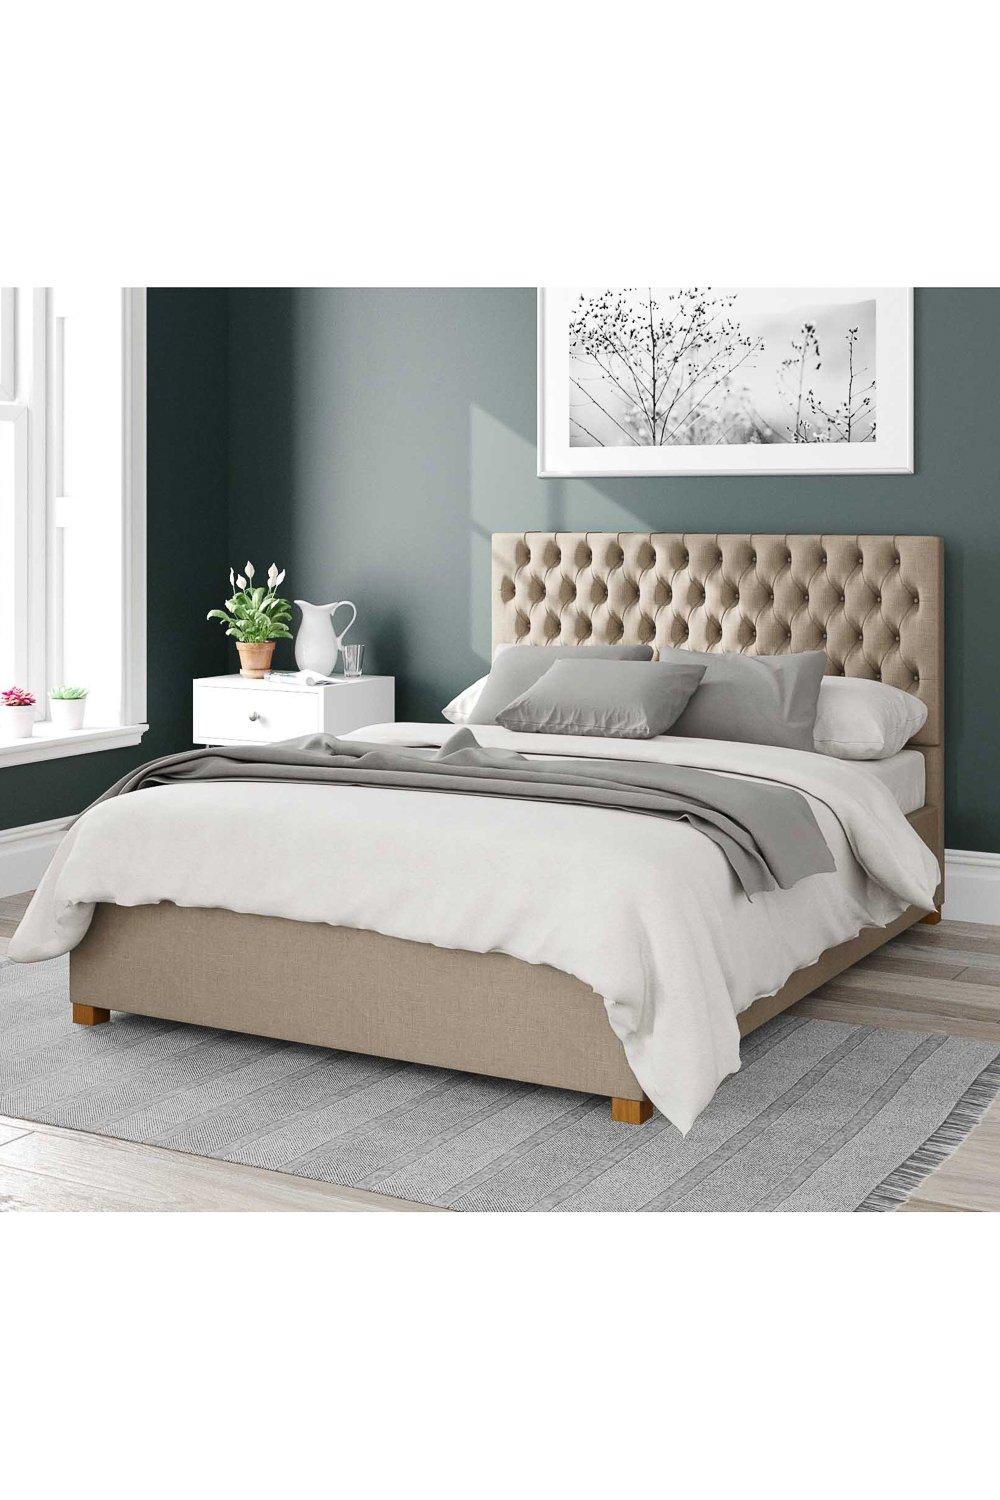 Nightingale Upholstered Ottoman Storage Bed, Eire Linen Fabric